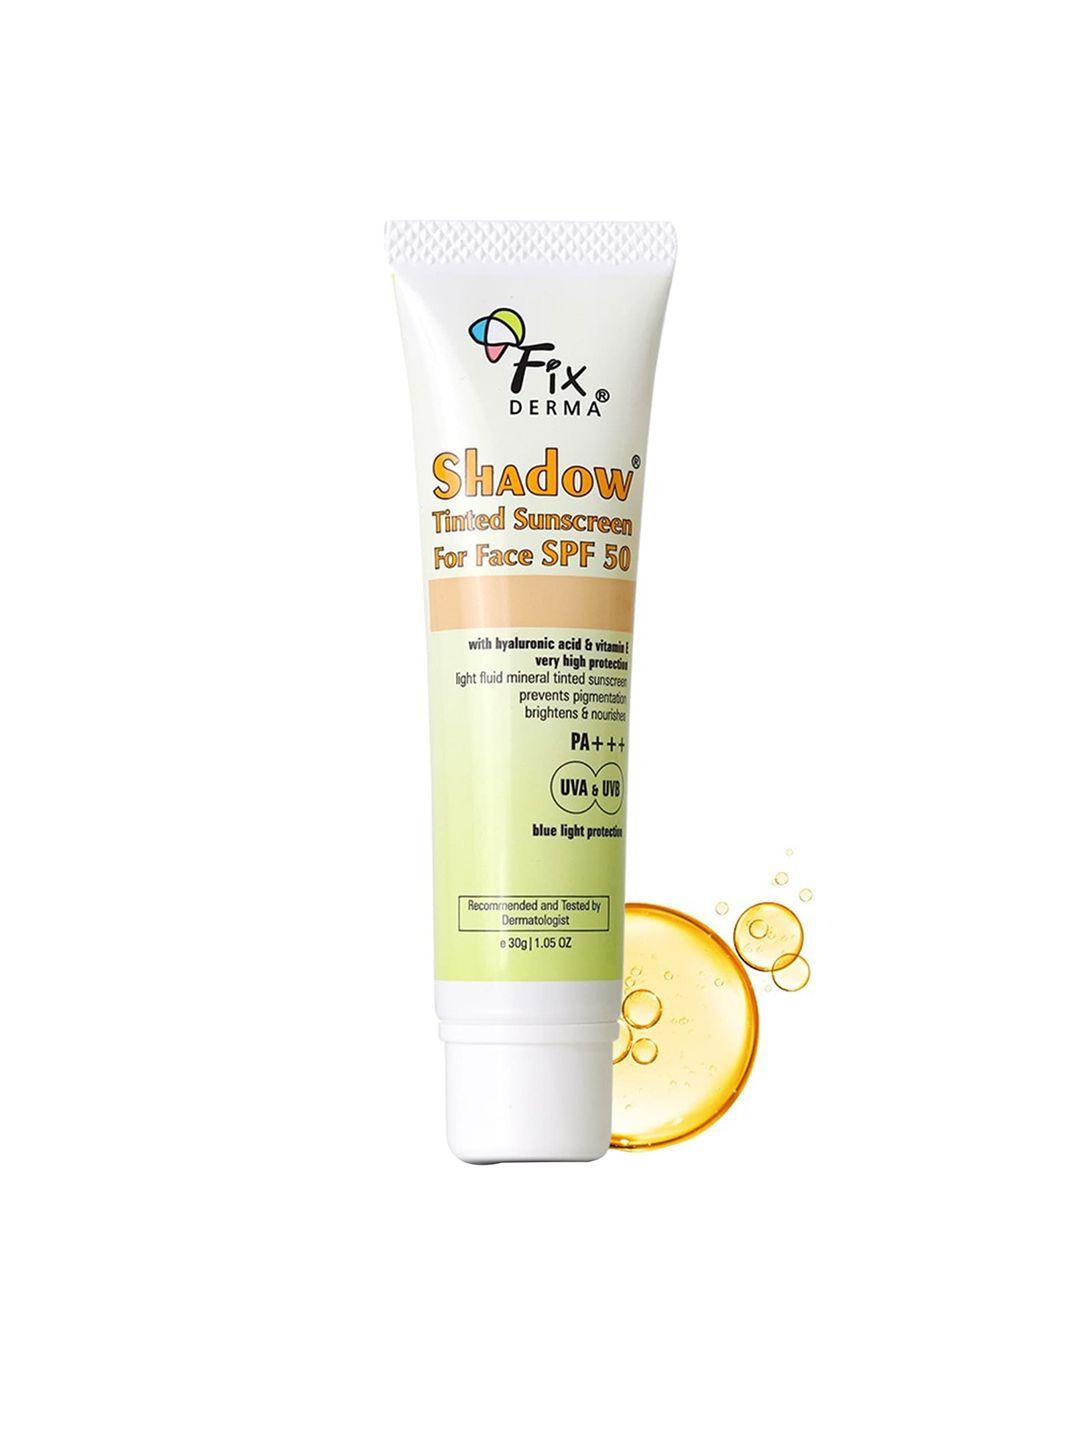 fixderma shadow tinted spf 50 pa+++ sunscreen with vitamin e & hyaluronic acid - 30 g